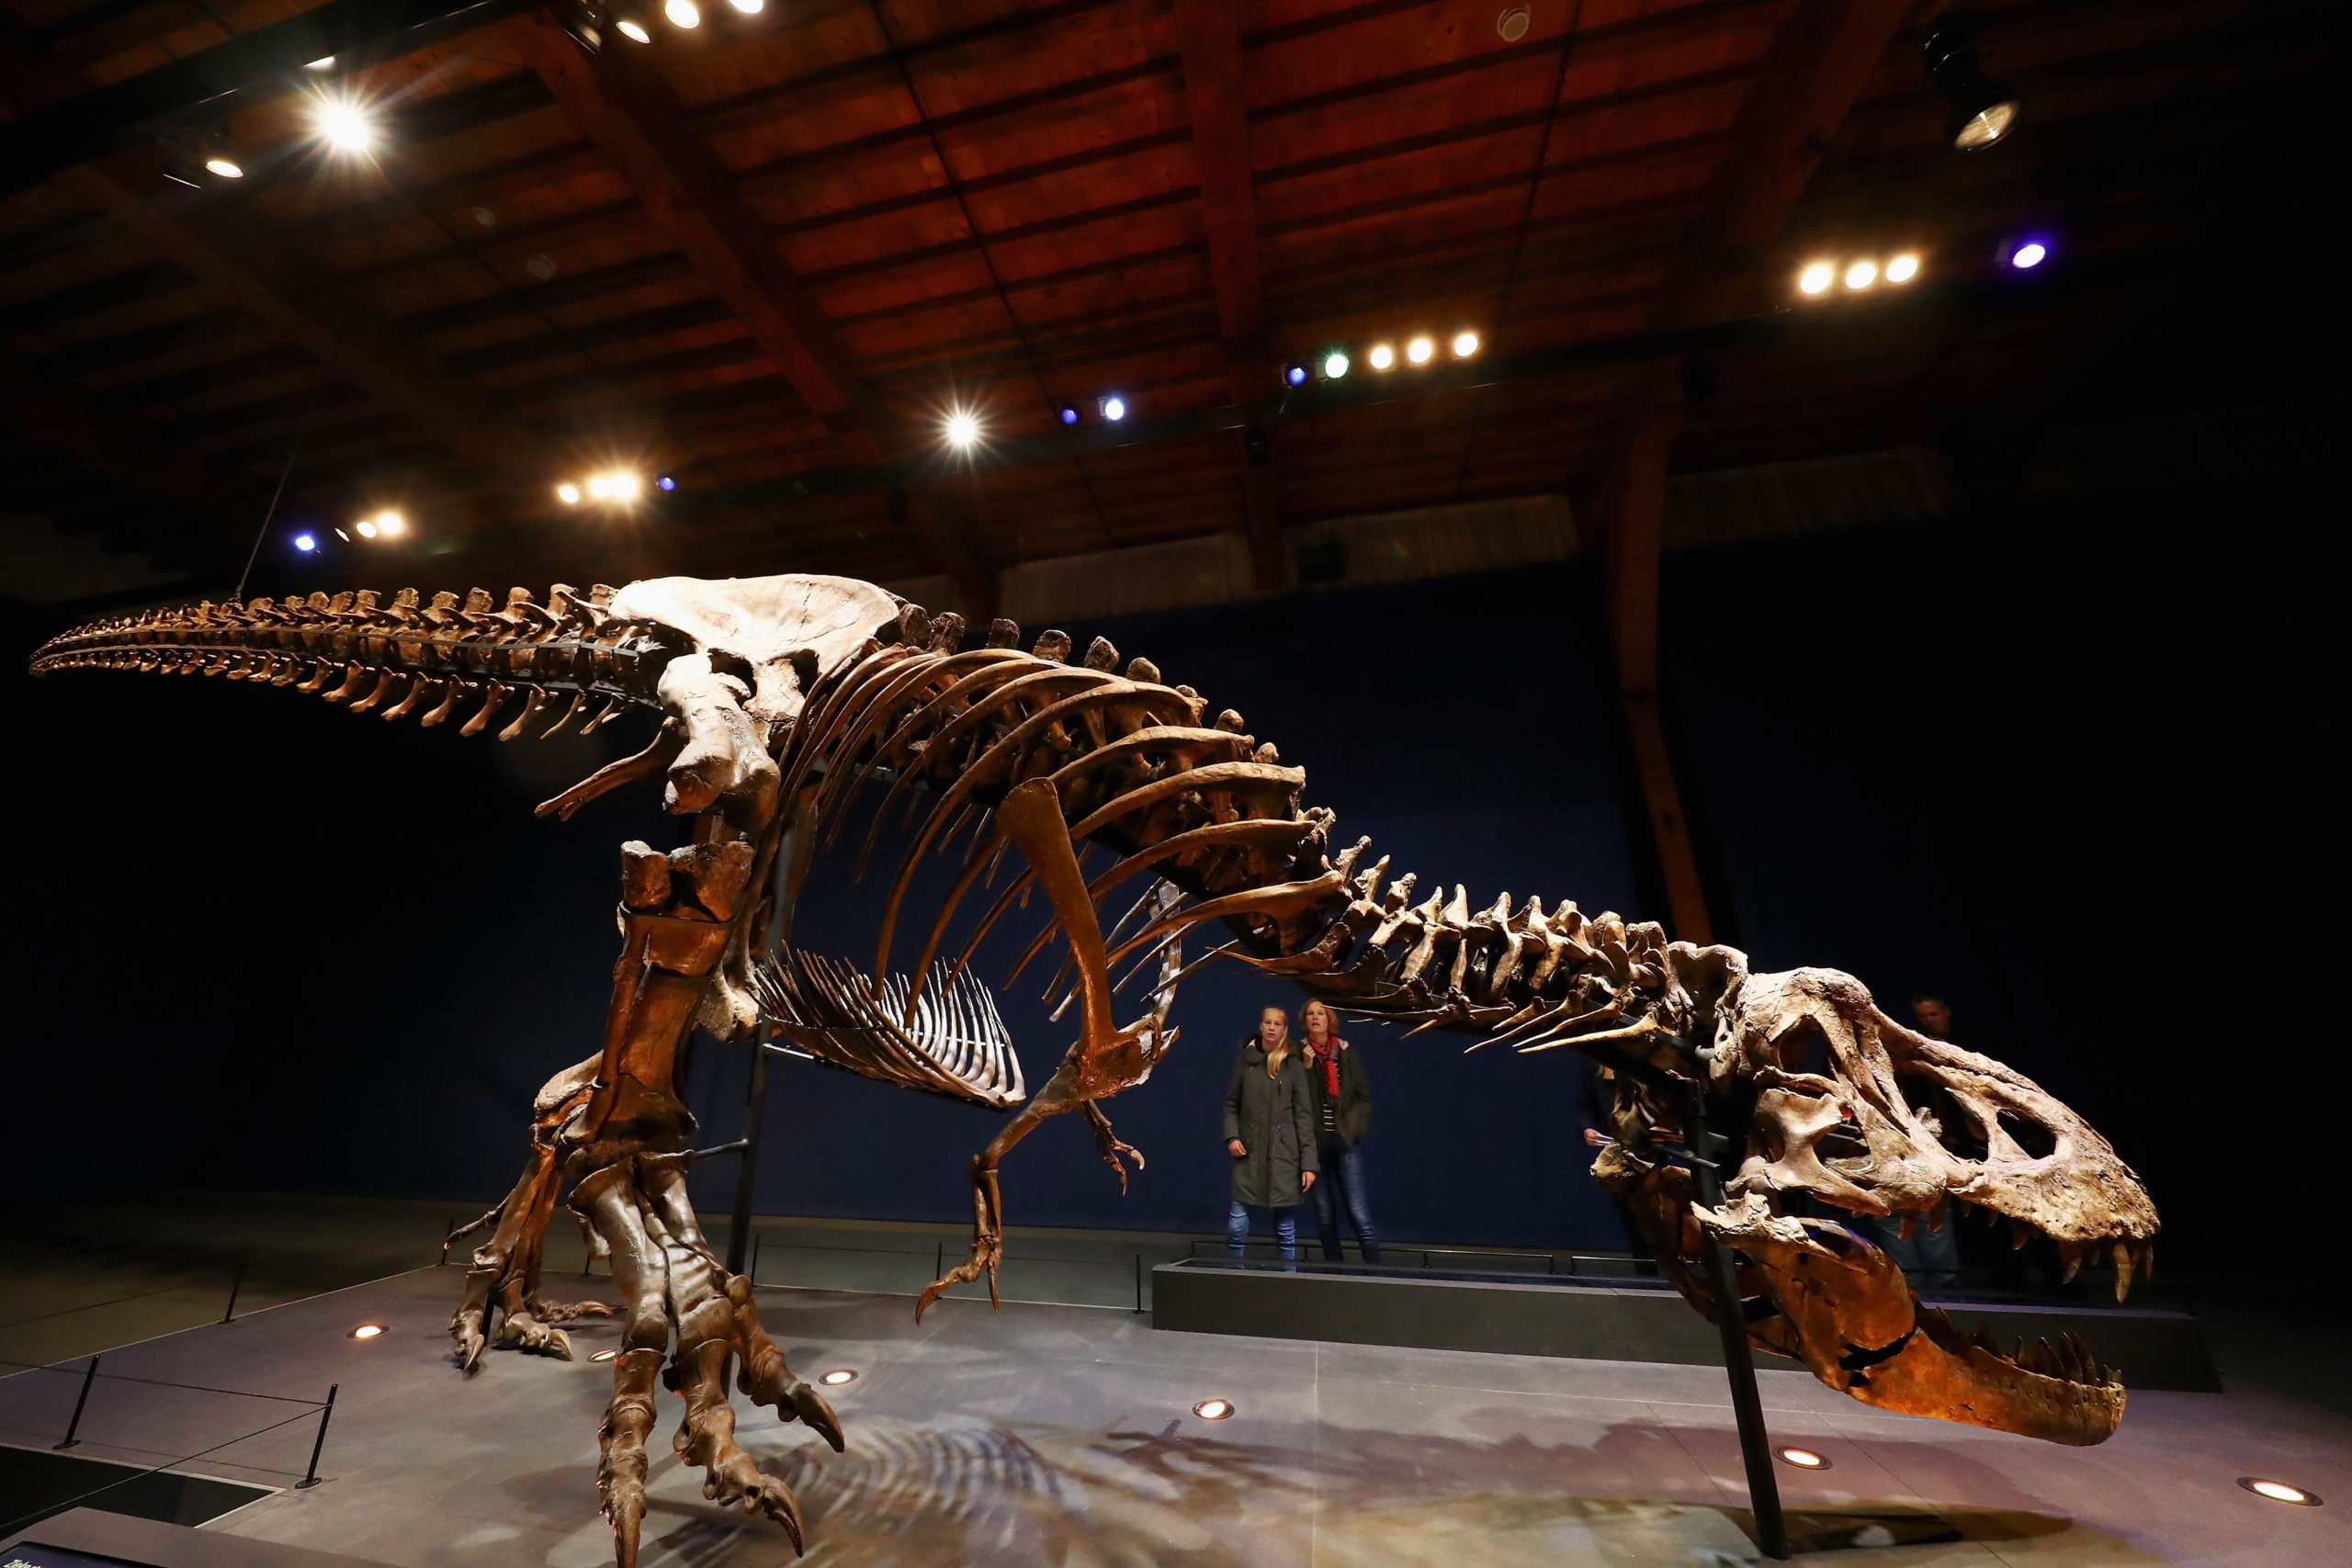 LEIDEN, NETHERLANDS - OCTOBER 17: A general view of the skull, jaw, rib cage and teeth of Trix the female T-Rex exhibition at the Naturalis or Natural History Museum of Leiden on October 17, 2016 in Leiden, Netherlands. The skeleton of Tyrannosaurus rex was excavated in 2013 in Montana, USA, by Naturalis Biodiversity Center. The fossil is part of the Naturalis collection and is more than 80% of the bone volume present. All essential and high­volume bones are in place. This places Trix in the top 3 ranking of the most complete Tyrannosaurus rex skeletons in the world. In addition, all the bones are extremely well preserved. The quality of this fossil is unmatched by any other large T-Rex find in the world. (Photo by Dean Mouhtaropoulos/Getty Images)